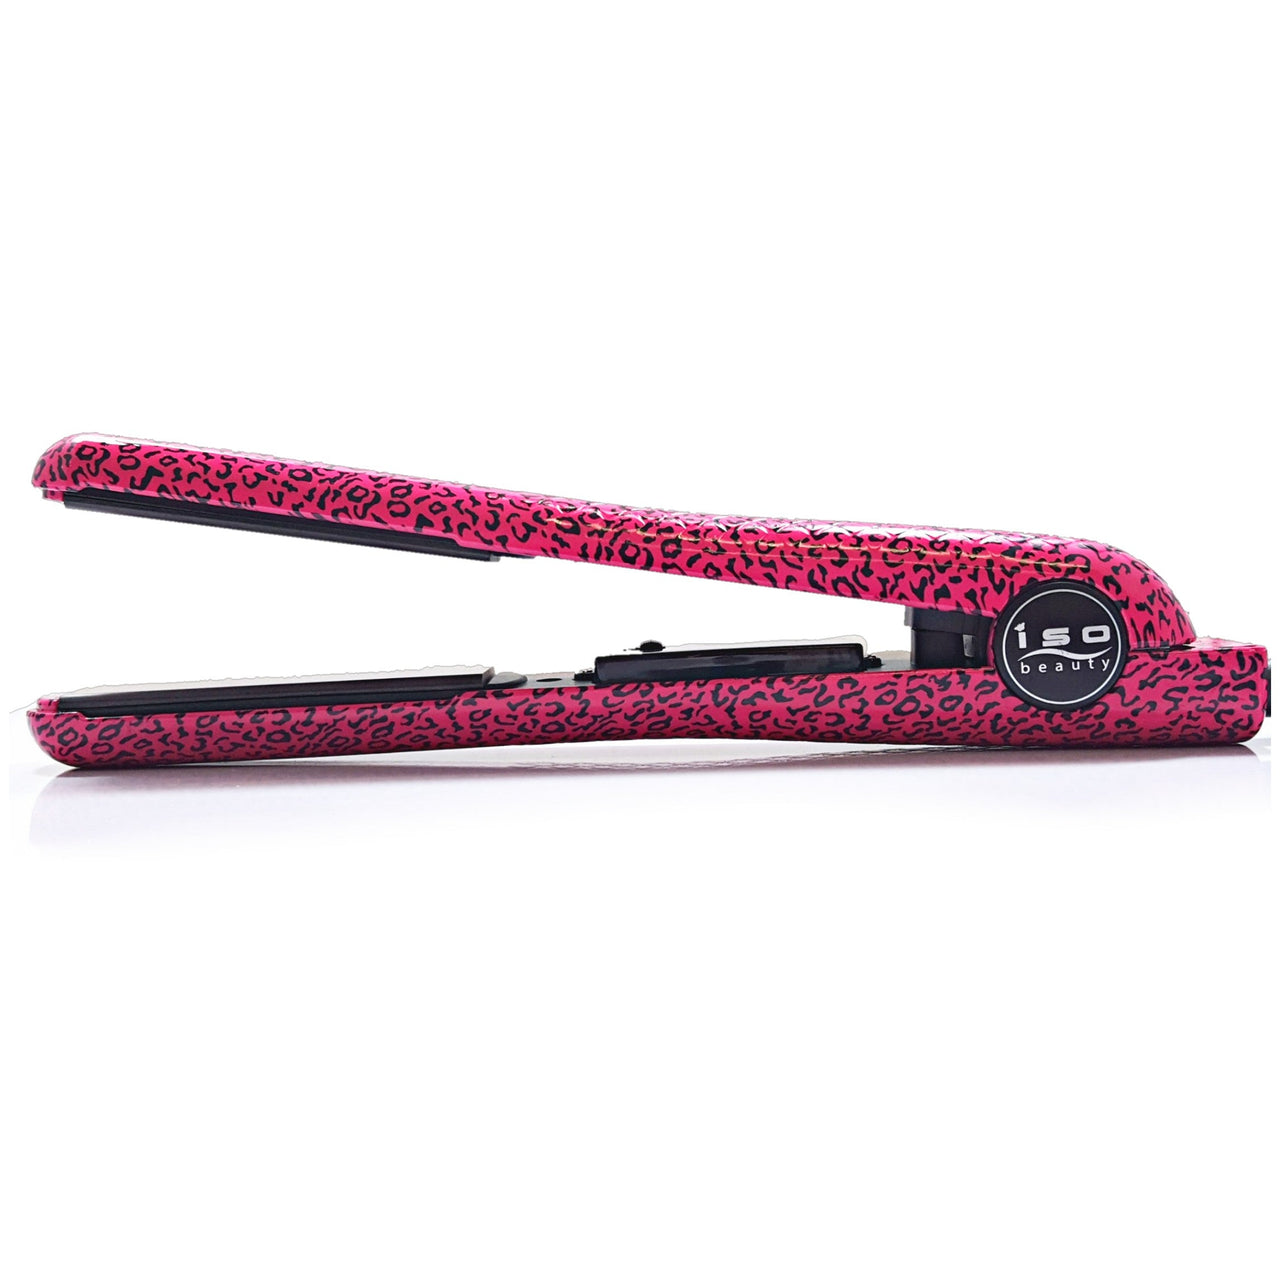 Limited Edition Pink Leopard 1.25" Ceramic Flat Iron Hair Straightener with Adjustable Temperature